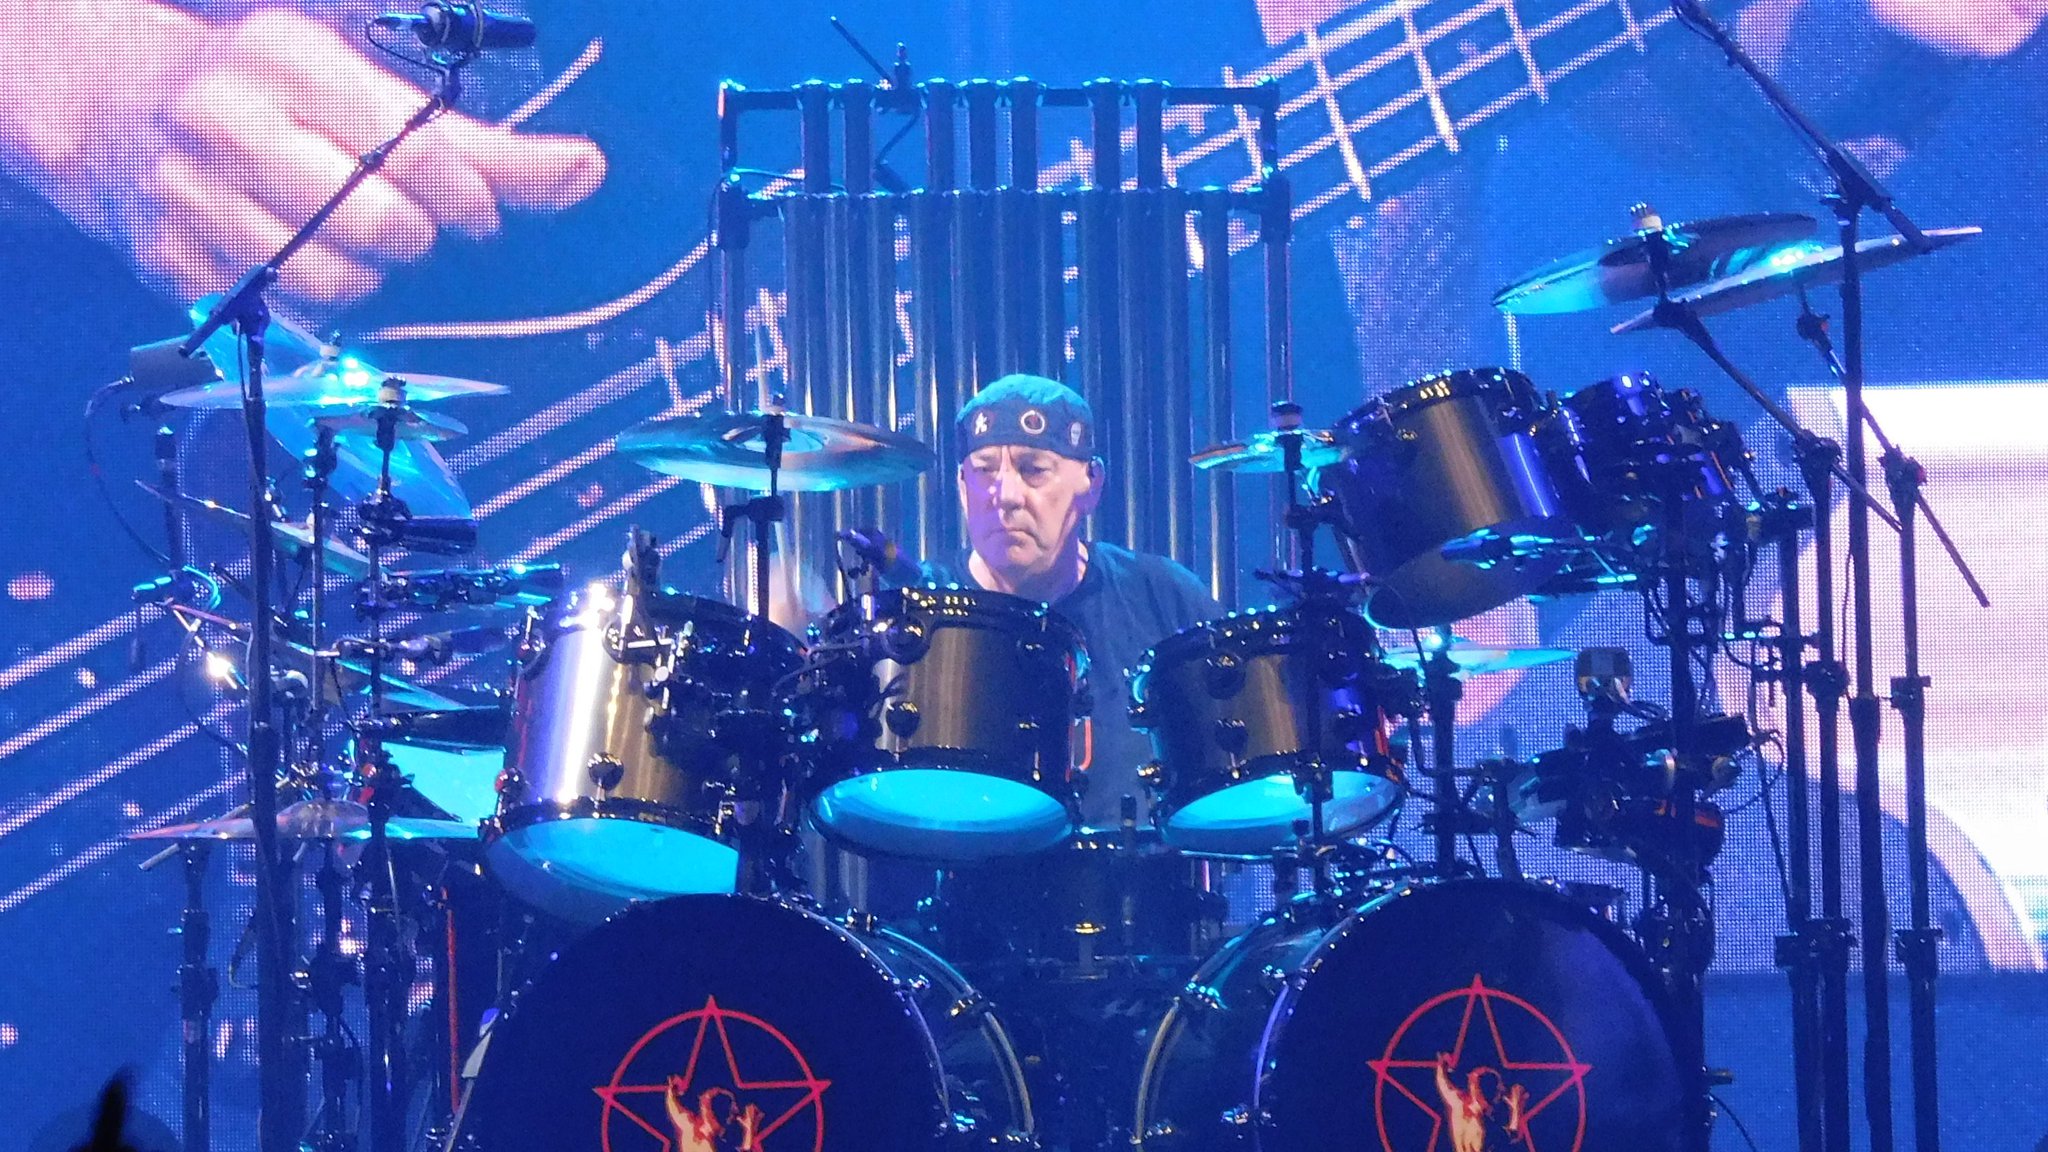 Happy 65th birthday to Neil Peart!  